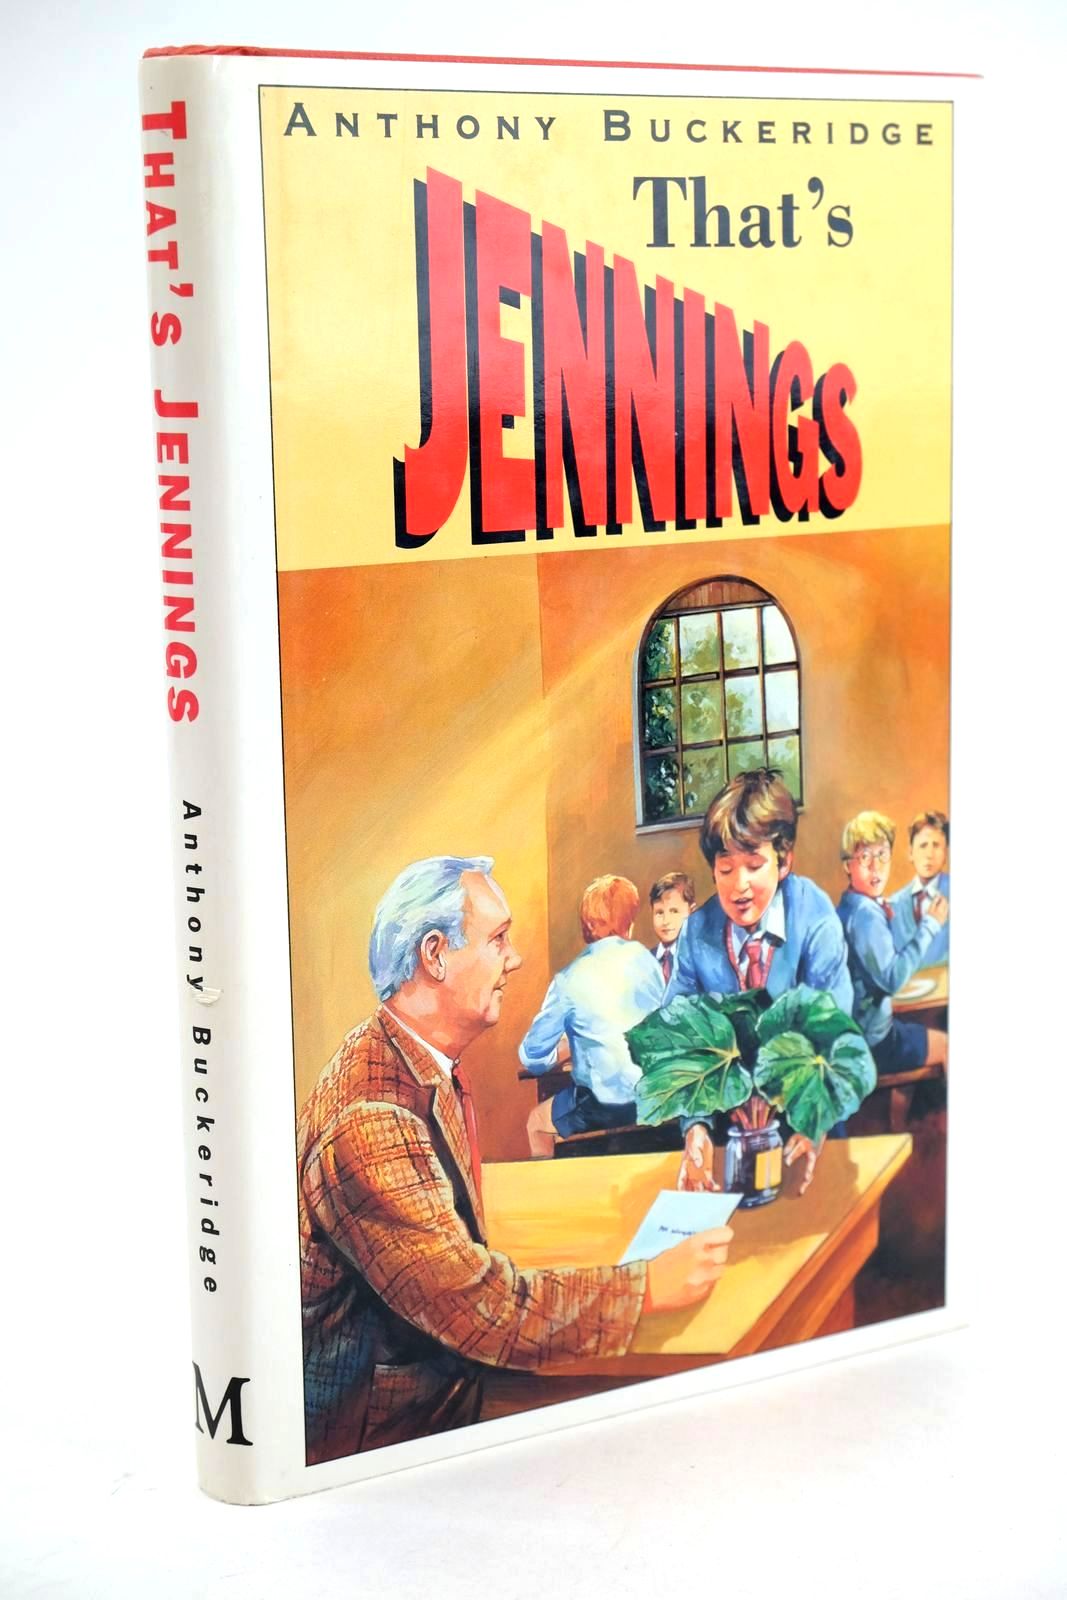 Photo of THAT'S JENNINGS written by Buckeridge, Anthony illustrated by Sutton, Rodney published by Macmillan Children's Books (STOCK CODE: 1324139)  for sale by Stella & Rose's Books